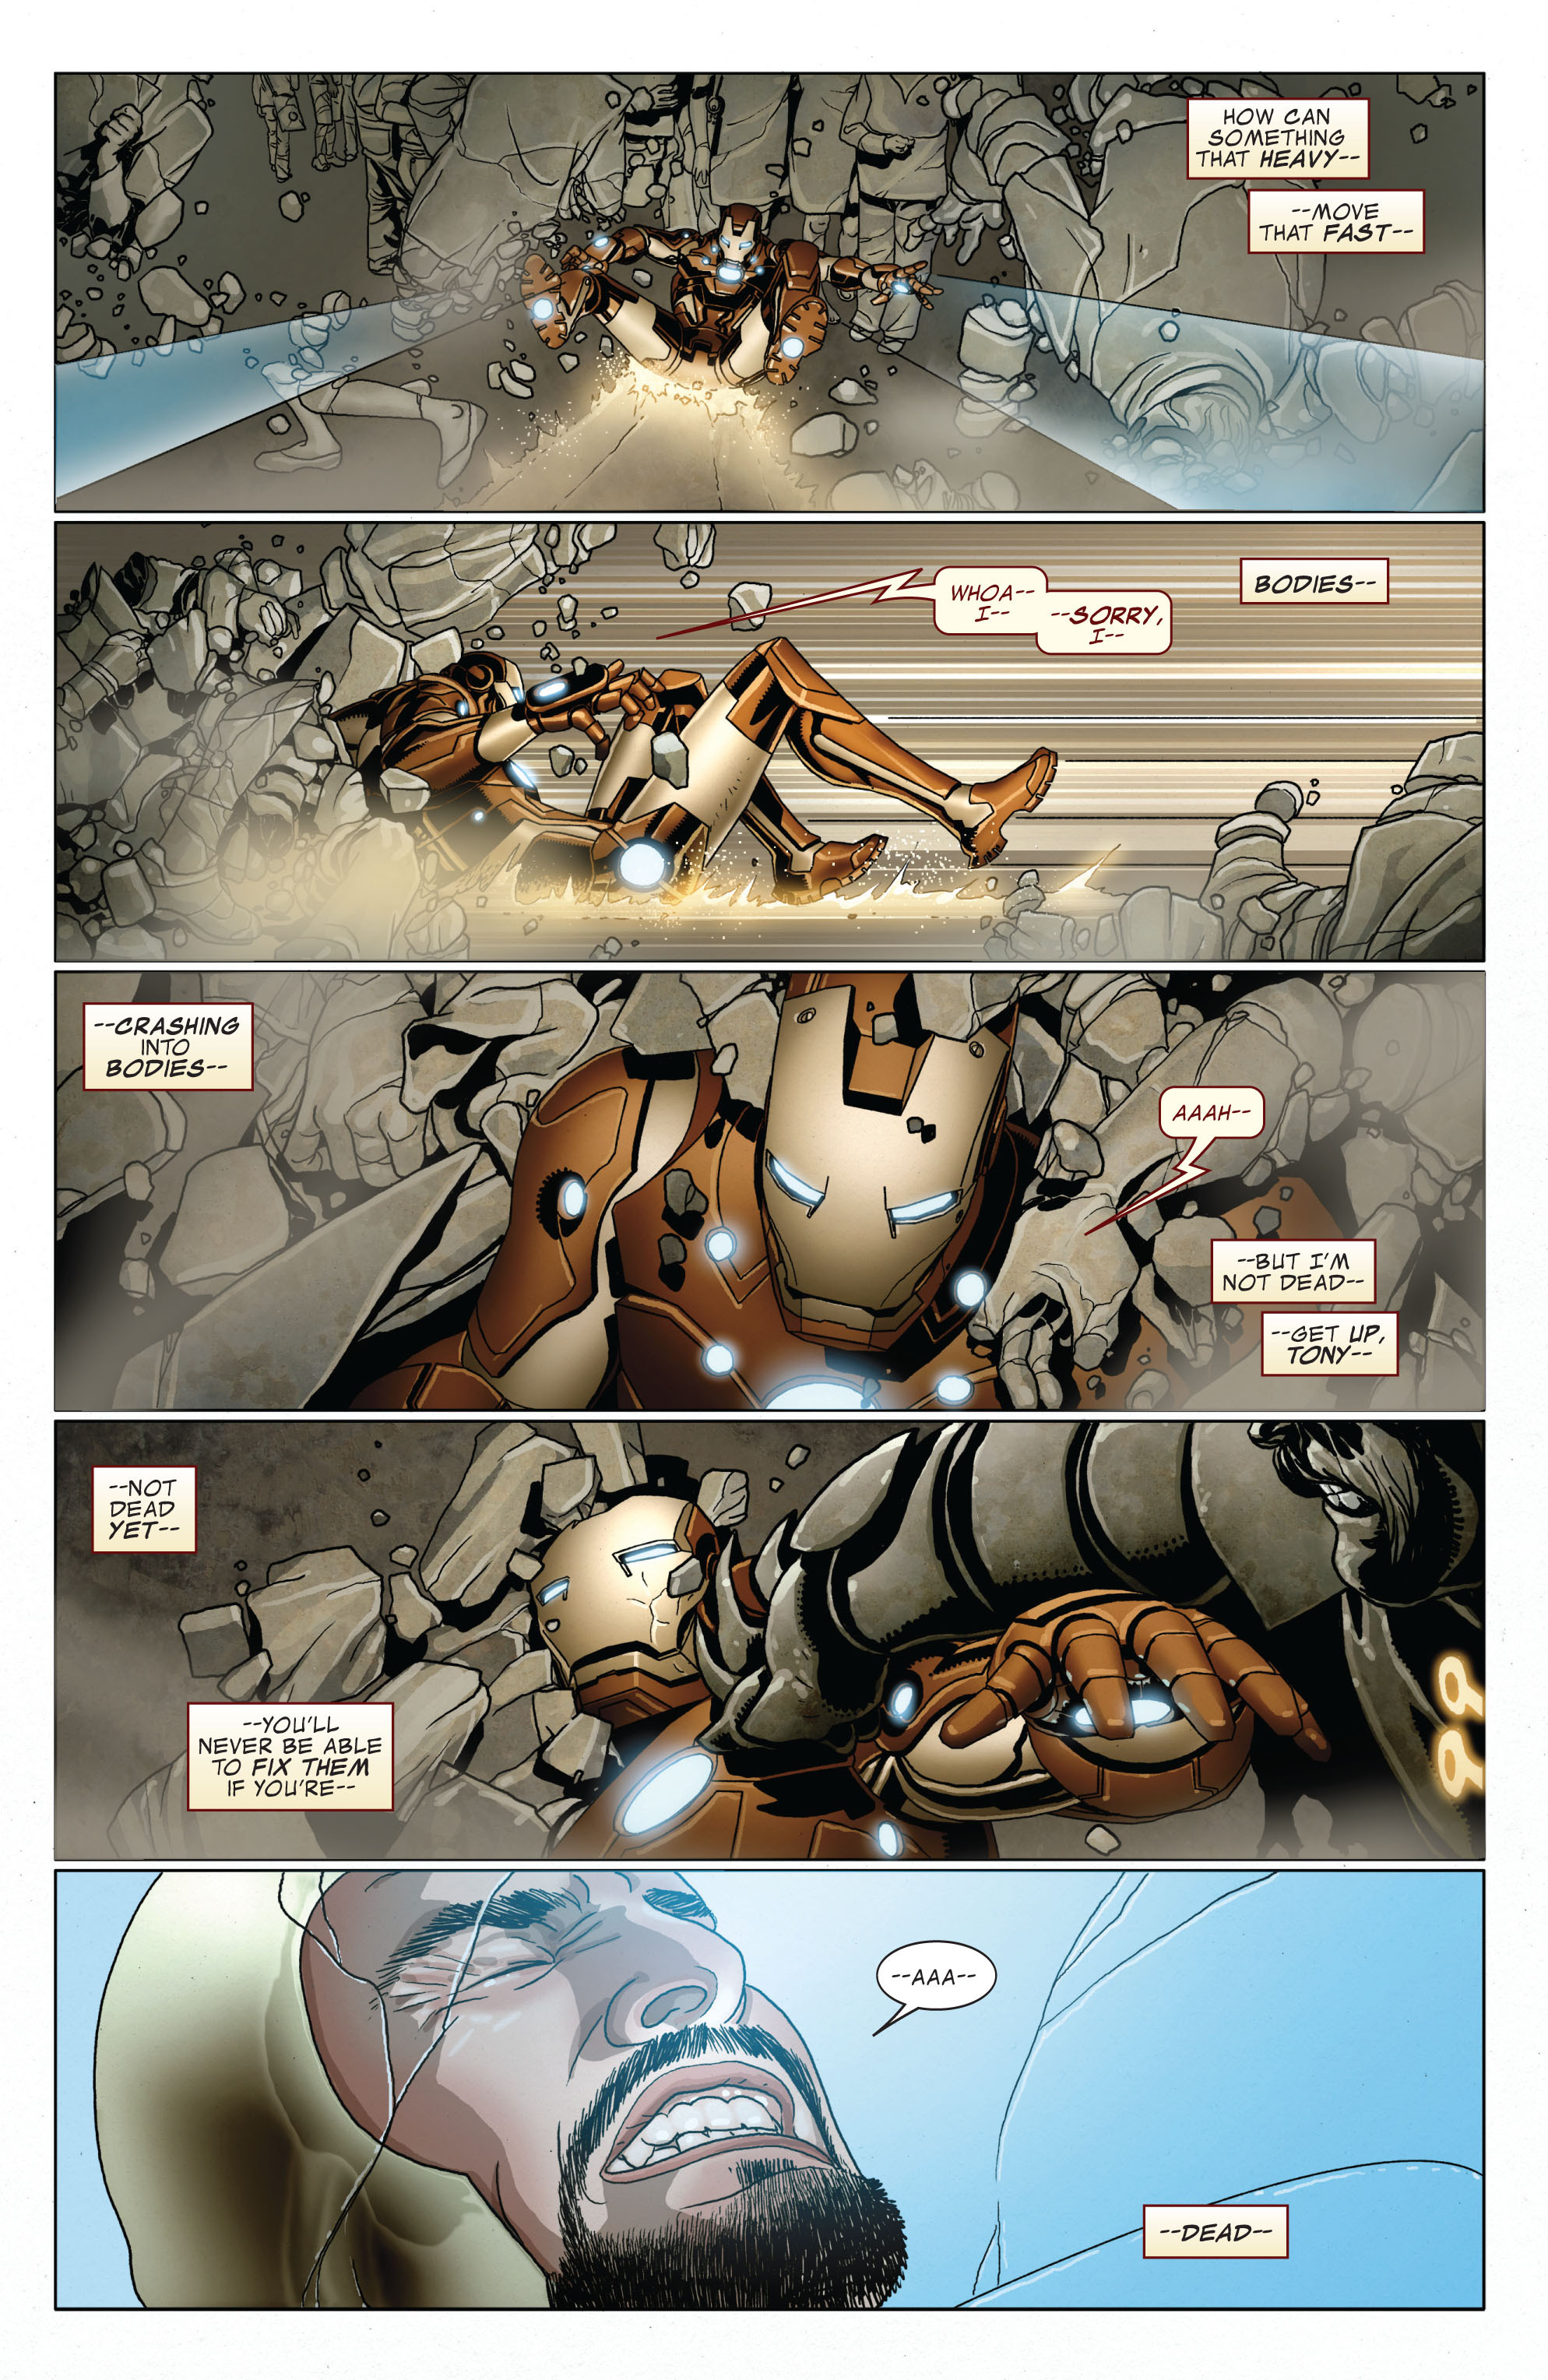 Invincible Iron Man (2008) 504 Page 17